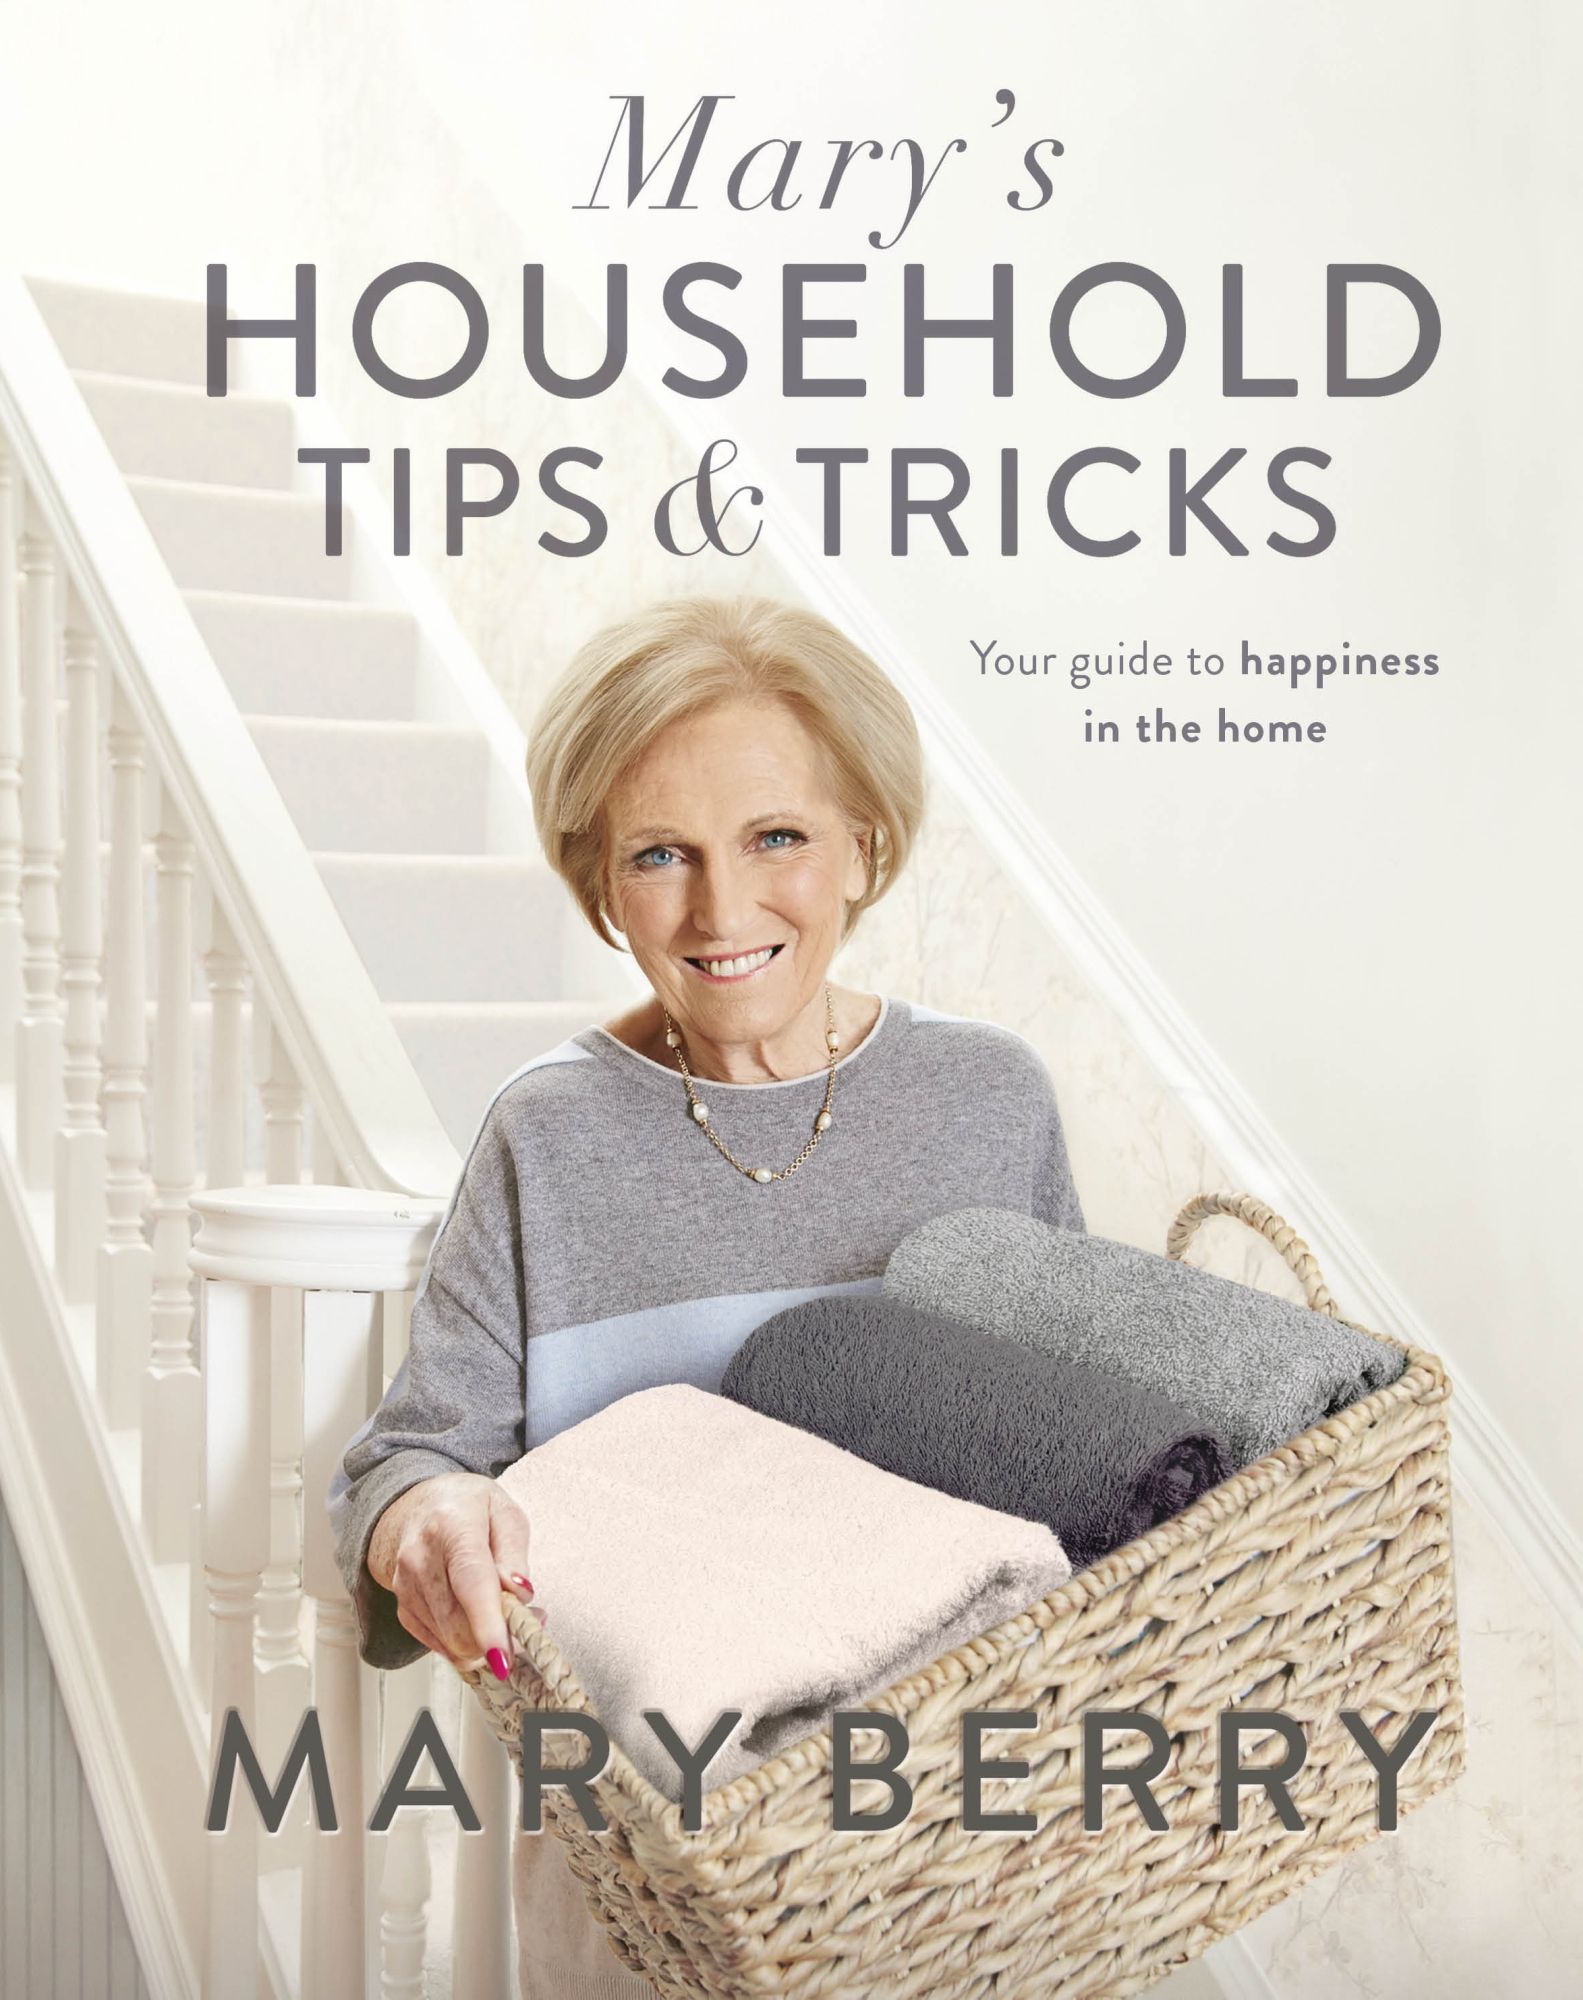 Household cleaning items in Mary's Household Tips & Tricks published by Michael Joseph (Loupe/Michael Joseph/PA)